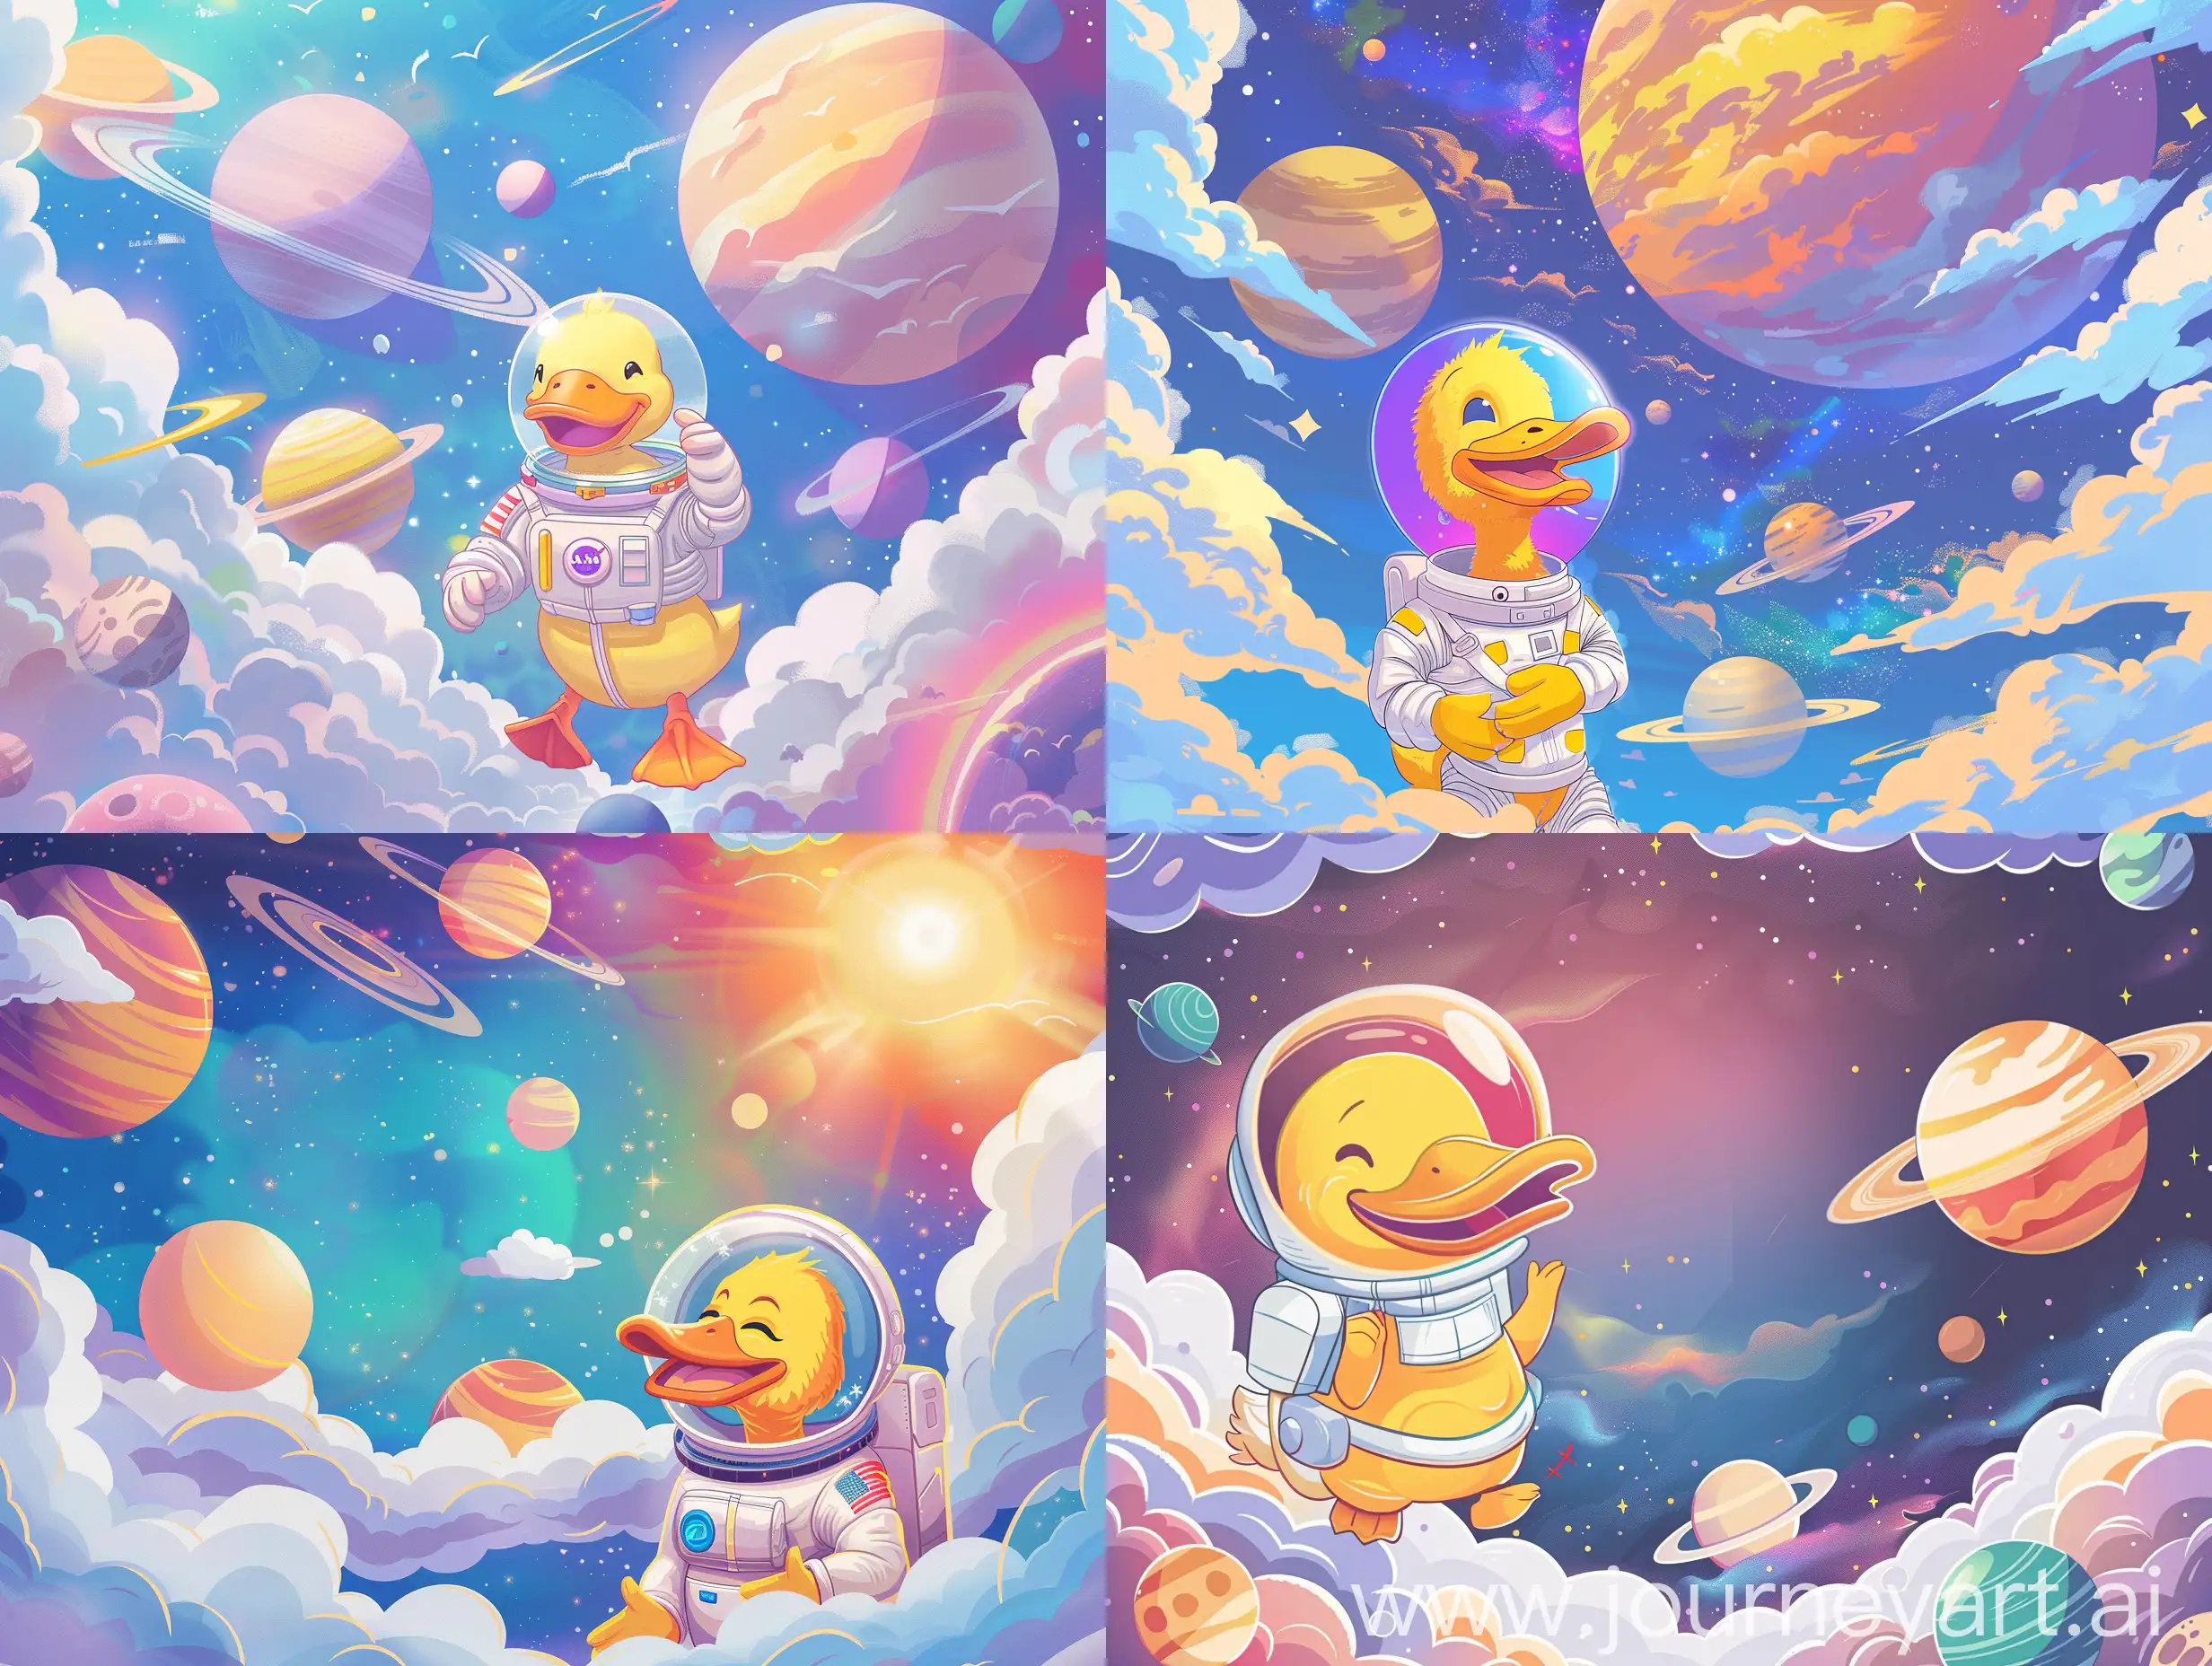 an illustration of a yellow duck in astronaut suit smiling , a space background with planets with light and sharp colors and big and fluffy clouds in landscape size